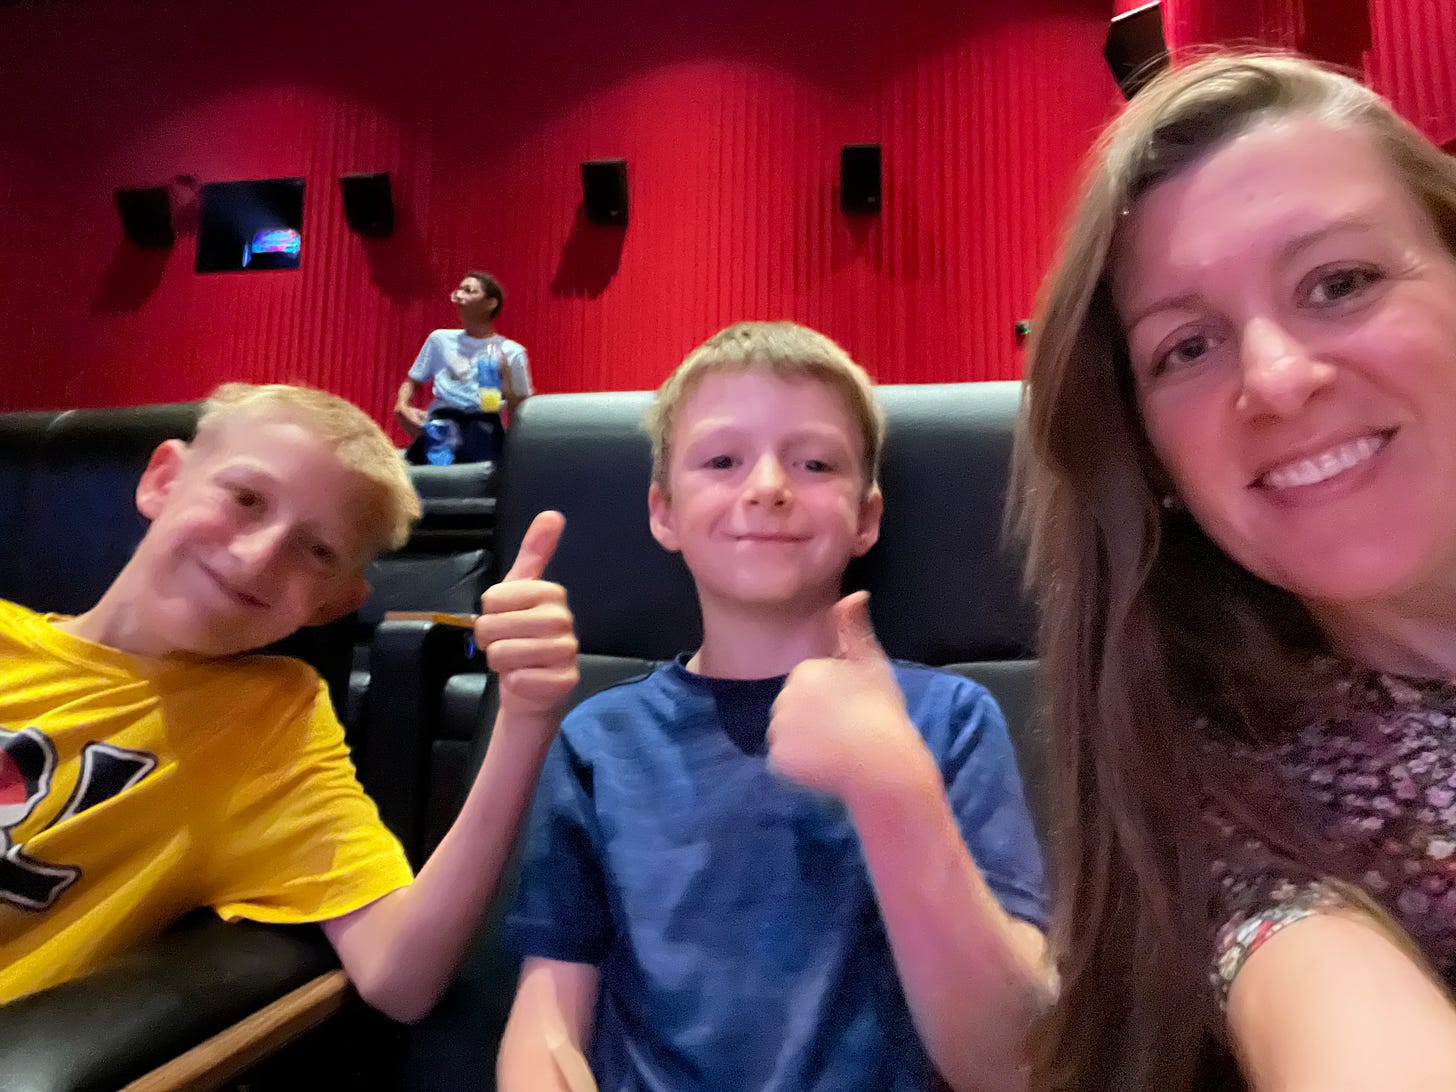 Amy's sons give a thumbs-up with smiles as Amy takes the group selfie in the movie theater